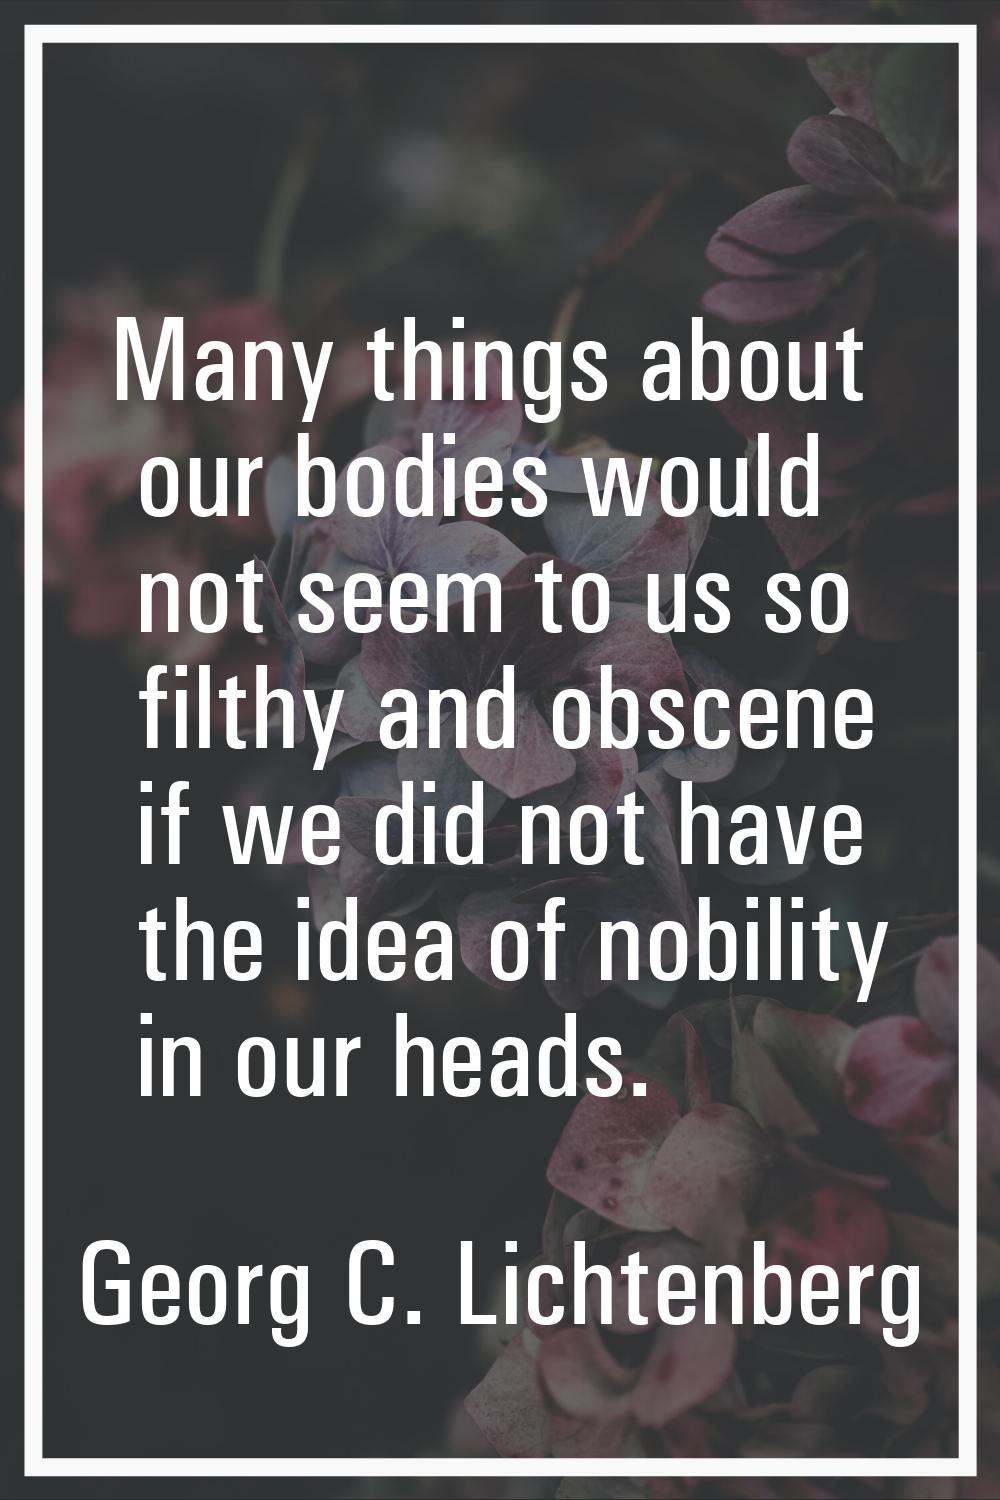 Many things about our bodies would not seem to us so filthy and obscene if we did not have the idea